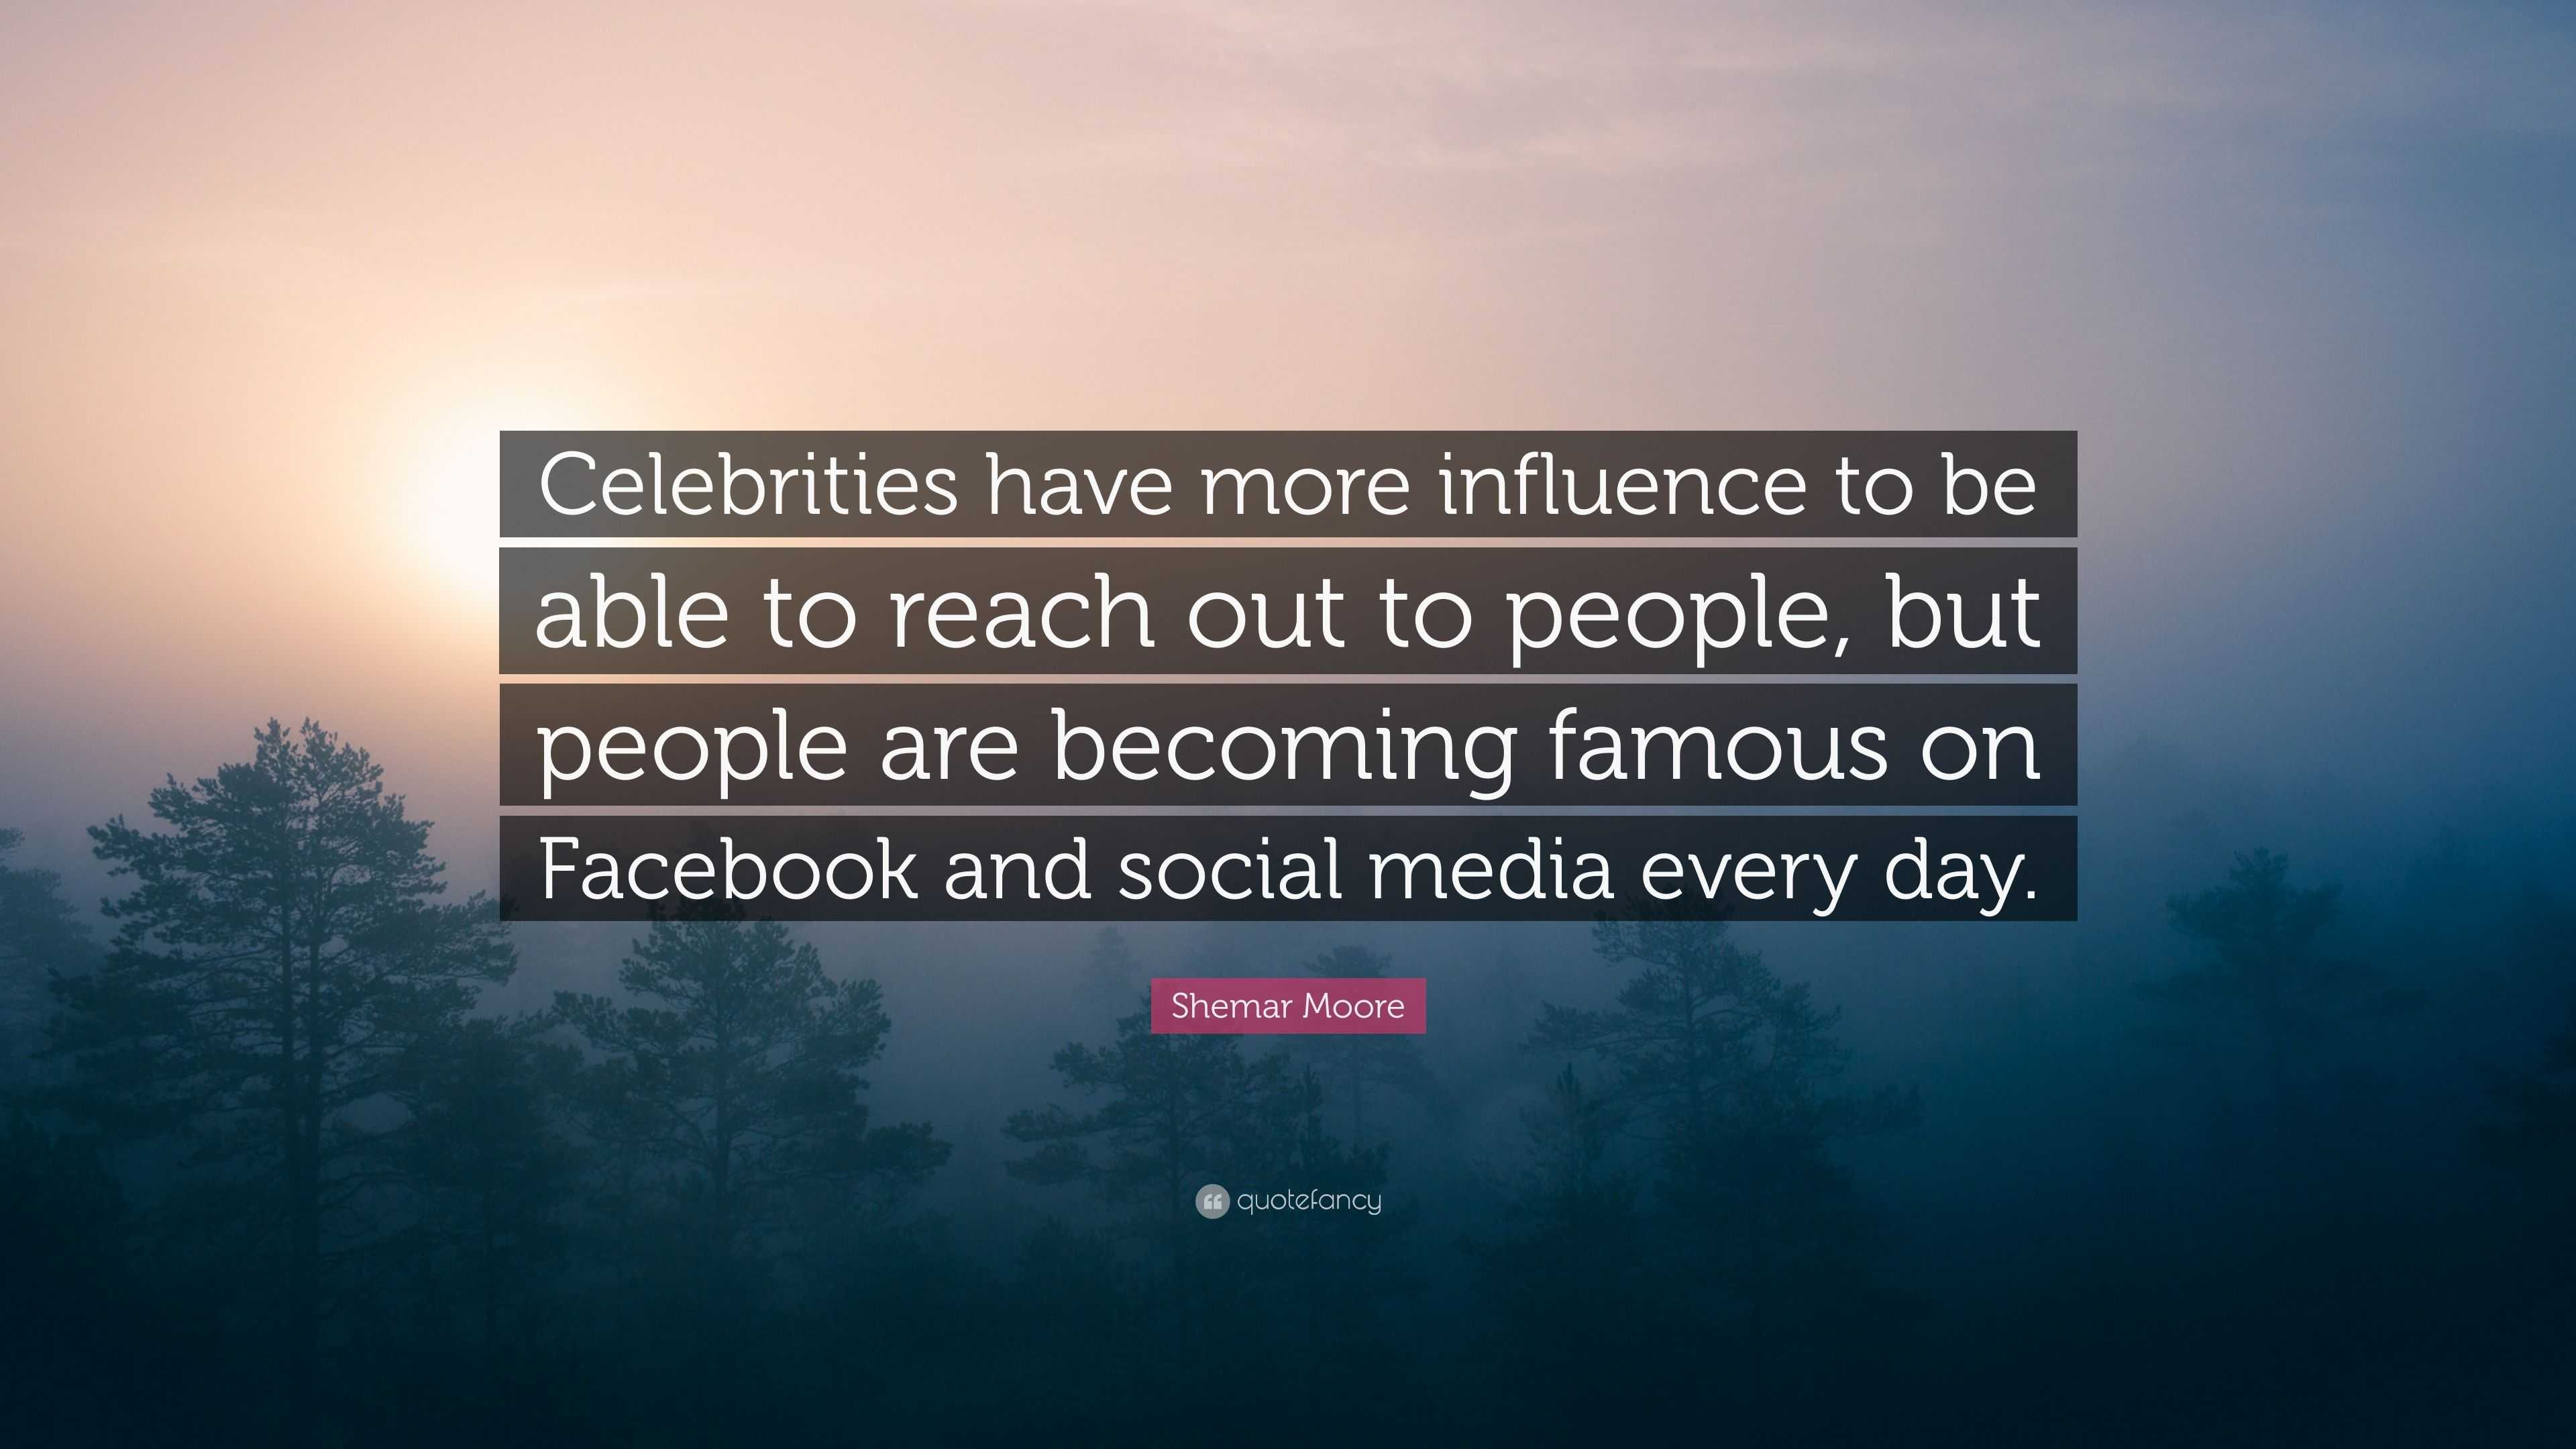 Shemar Moore Quote Celebrities Have More Influence To Be Able To Reach Out To People But People Are Becoming Famous On Facebook And Social 7 Wallpapers Quotefancy